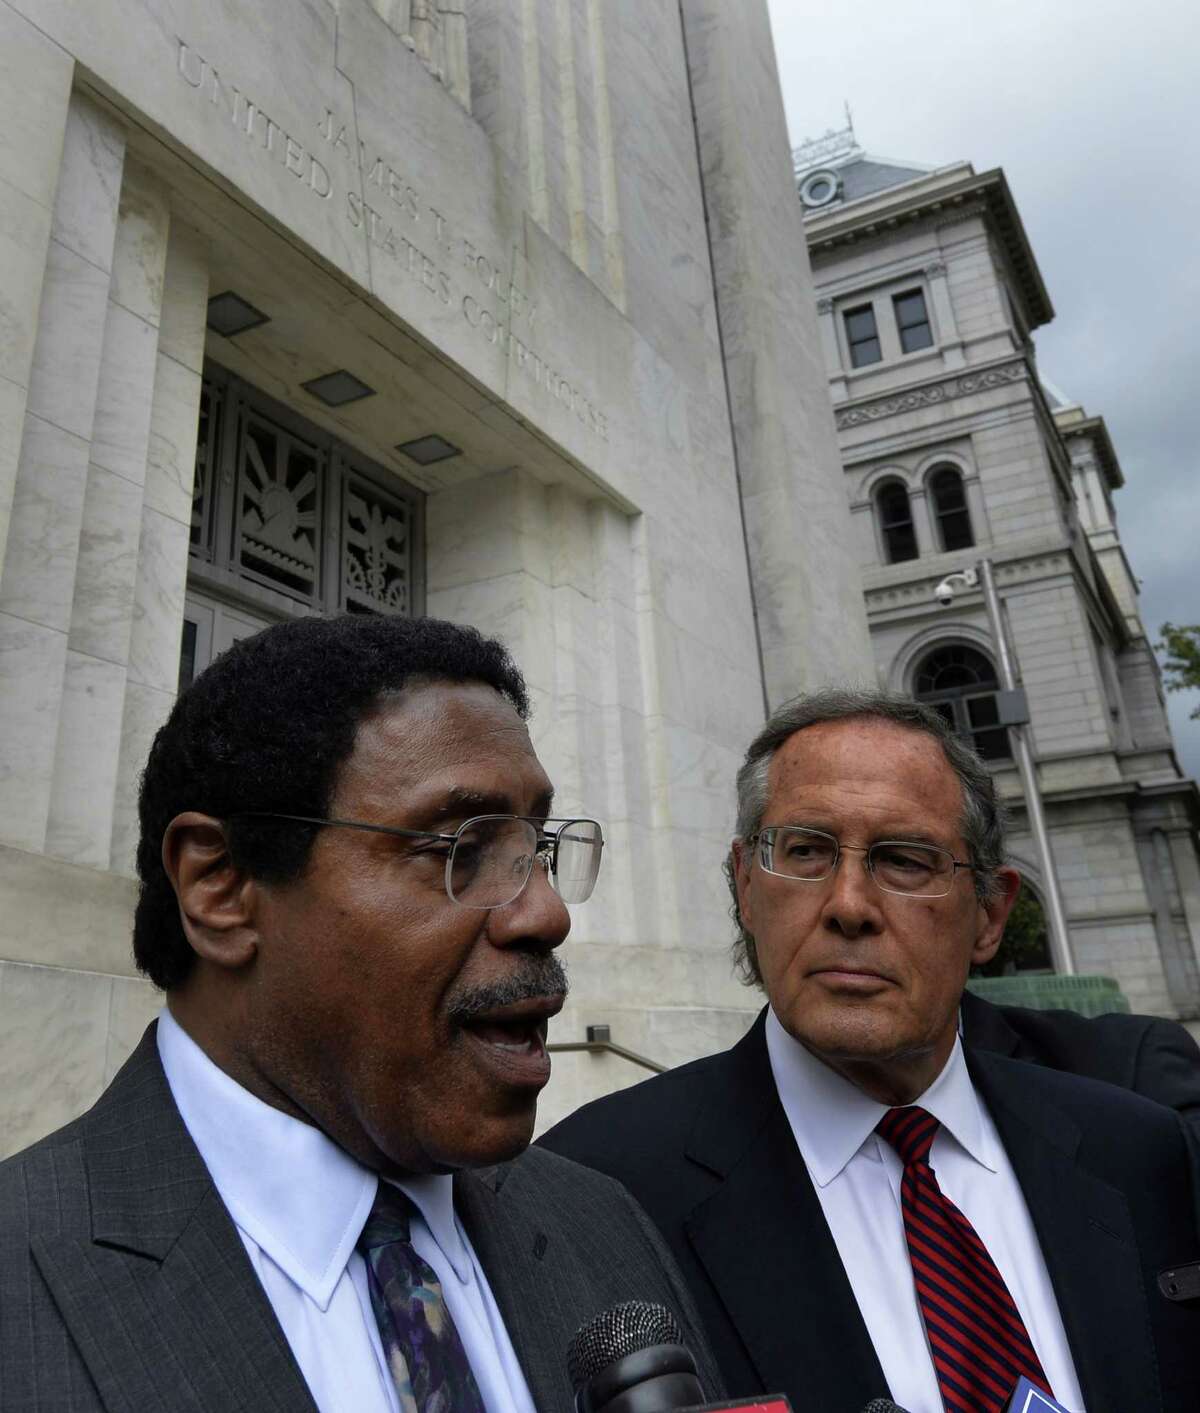 Assemblyman William Scarborough is scheduled to plead guilty to felony charges Thursday in state and federal courtrooms. He faces at least a year in prison for allegedly defrauding the state travel-voucher system, and stealing campaign funds for personal use. (Skip Dickstein/Times Union)